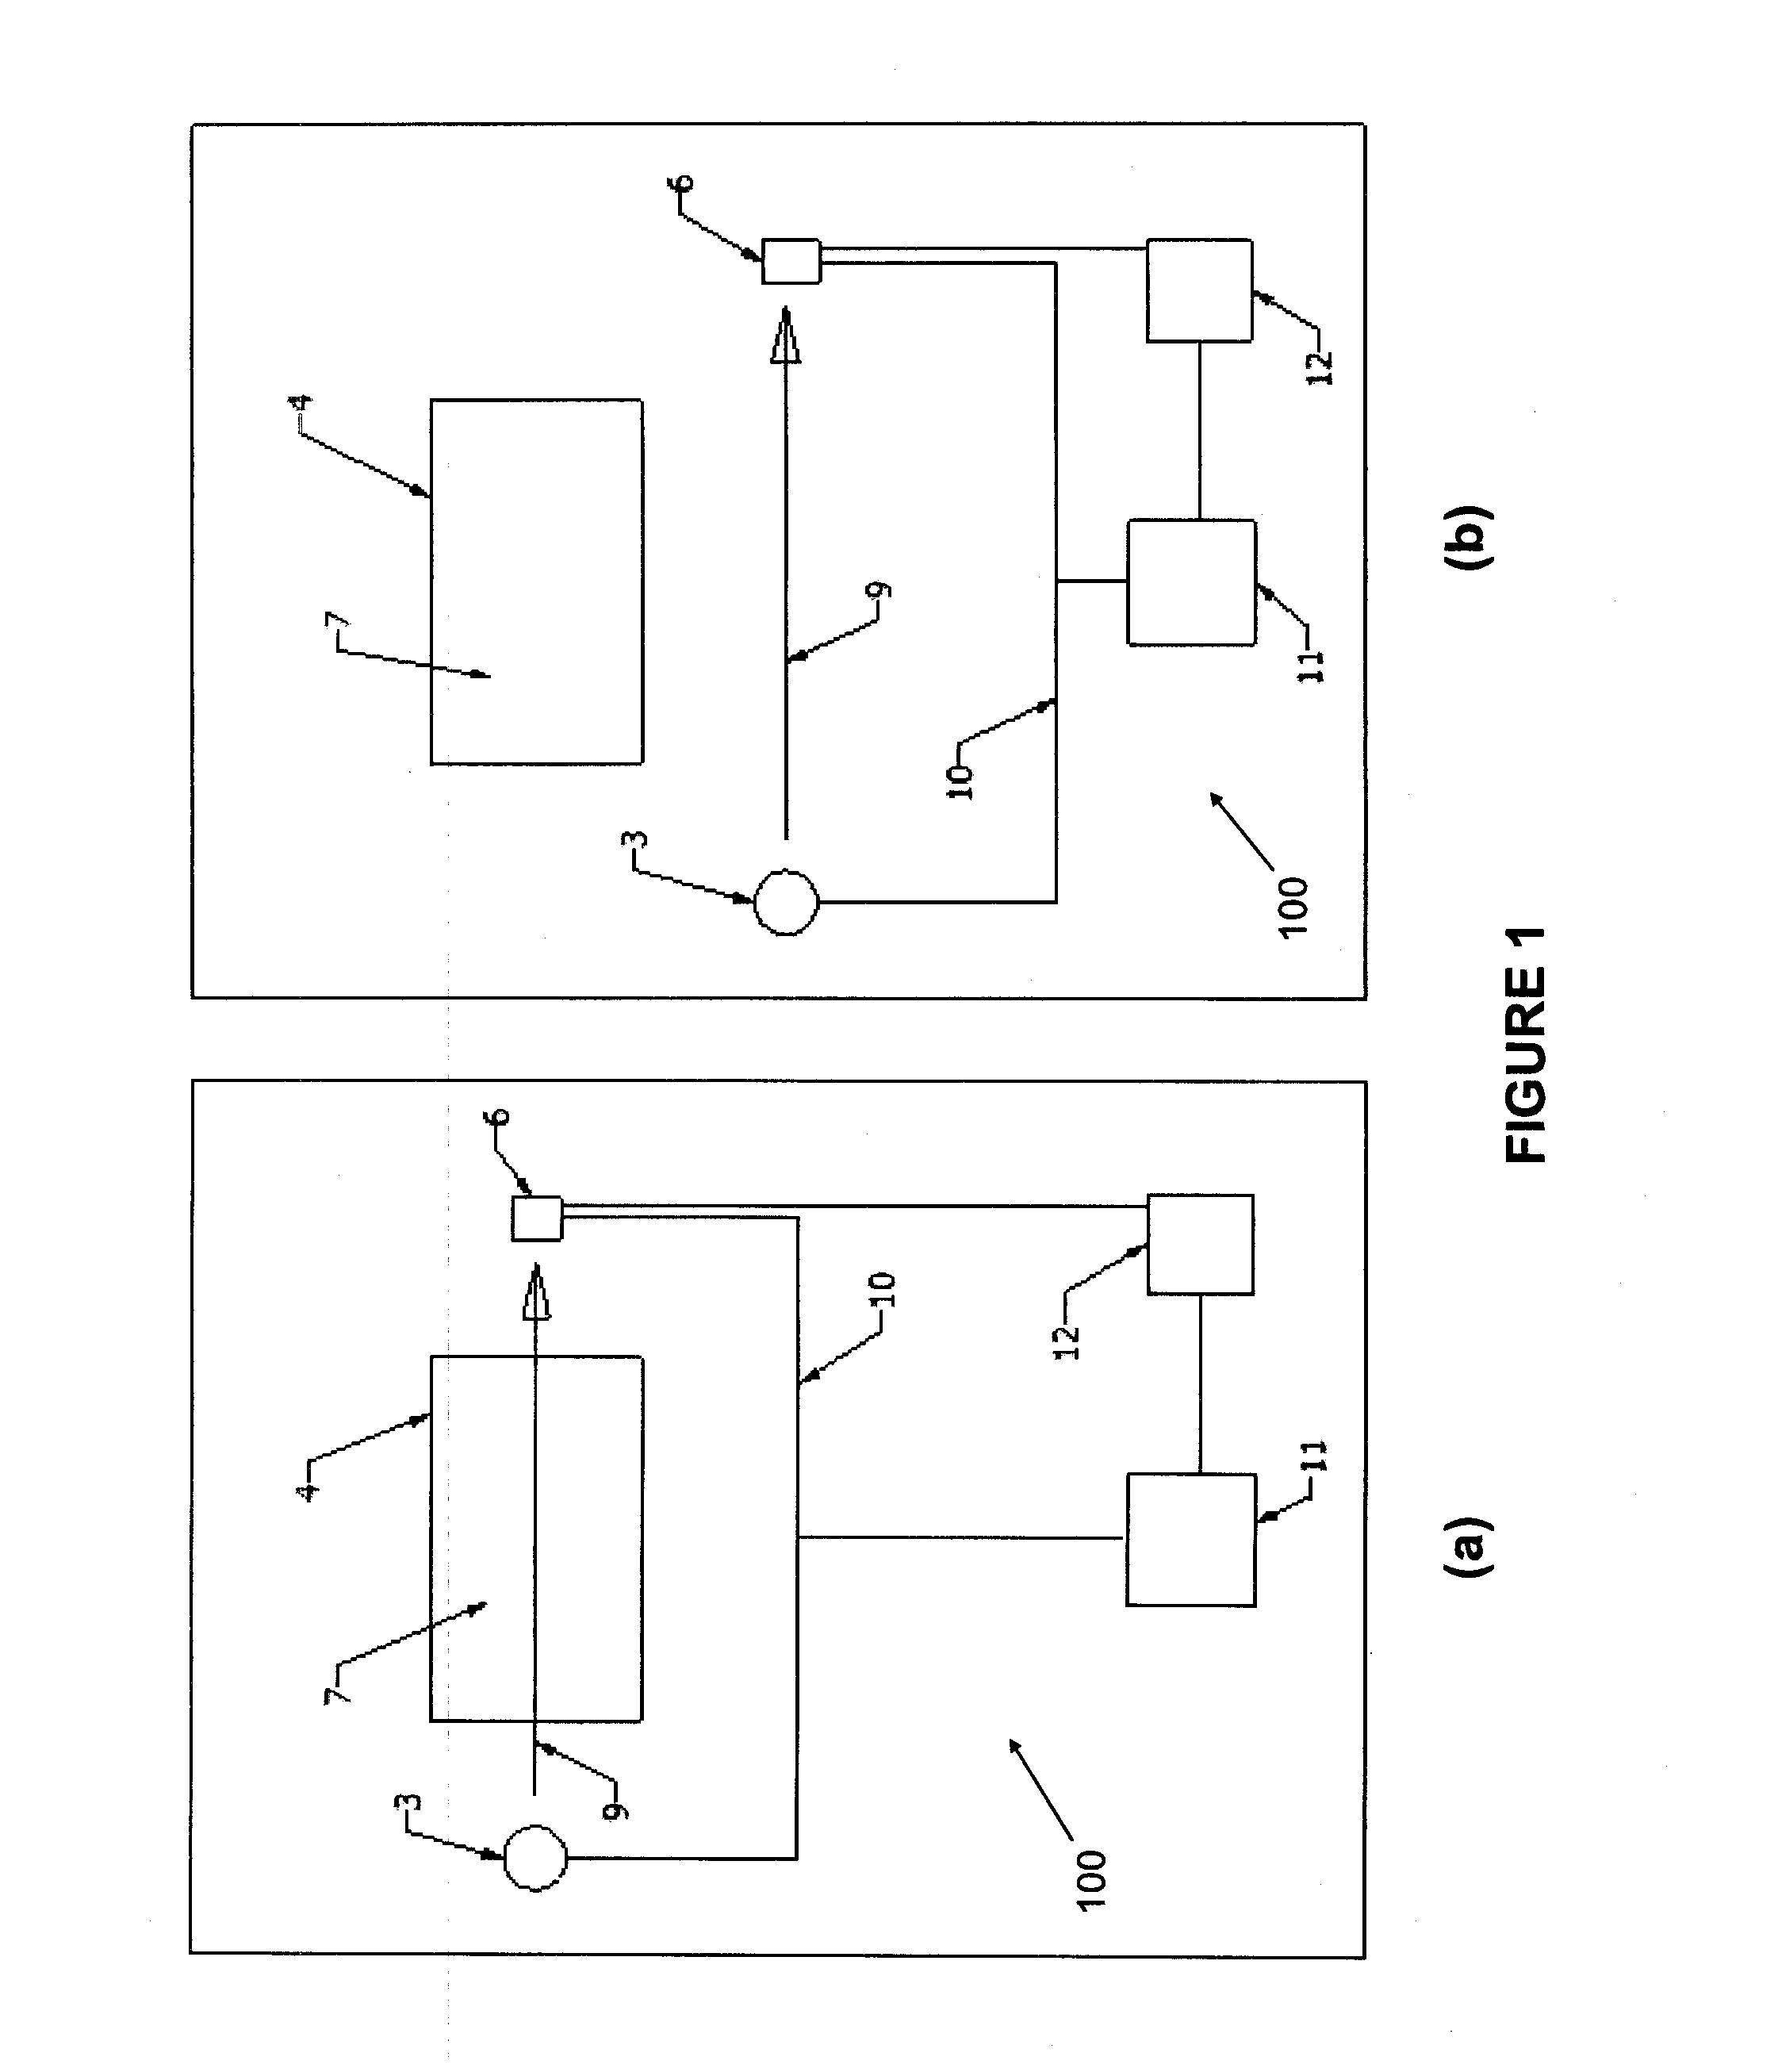 Apparatus and method for measuring transmittance